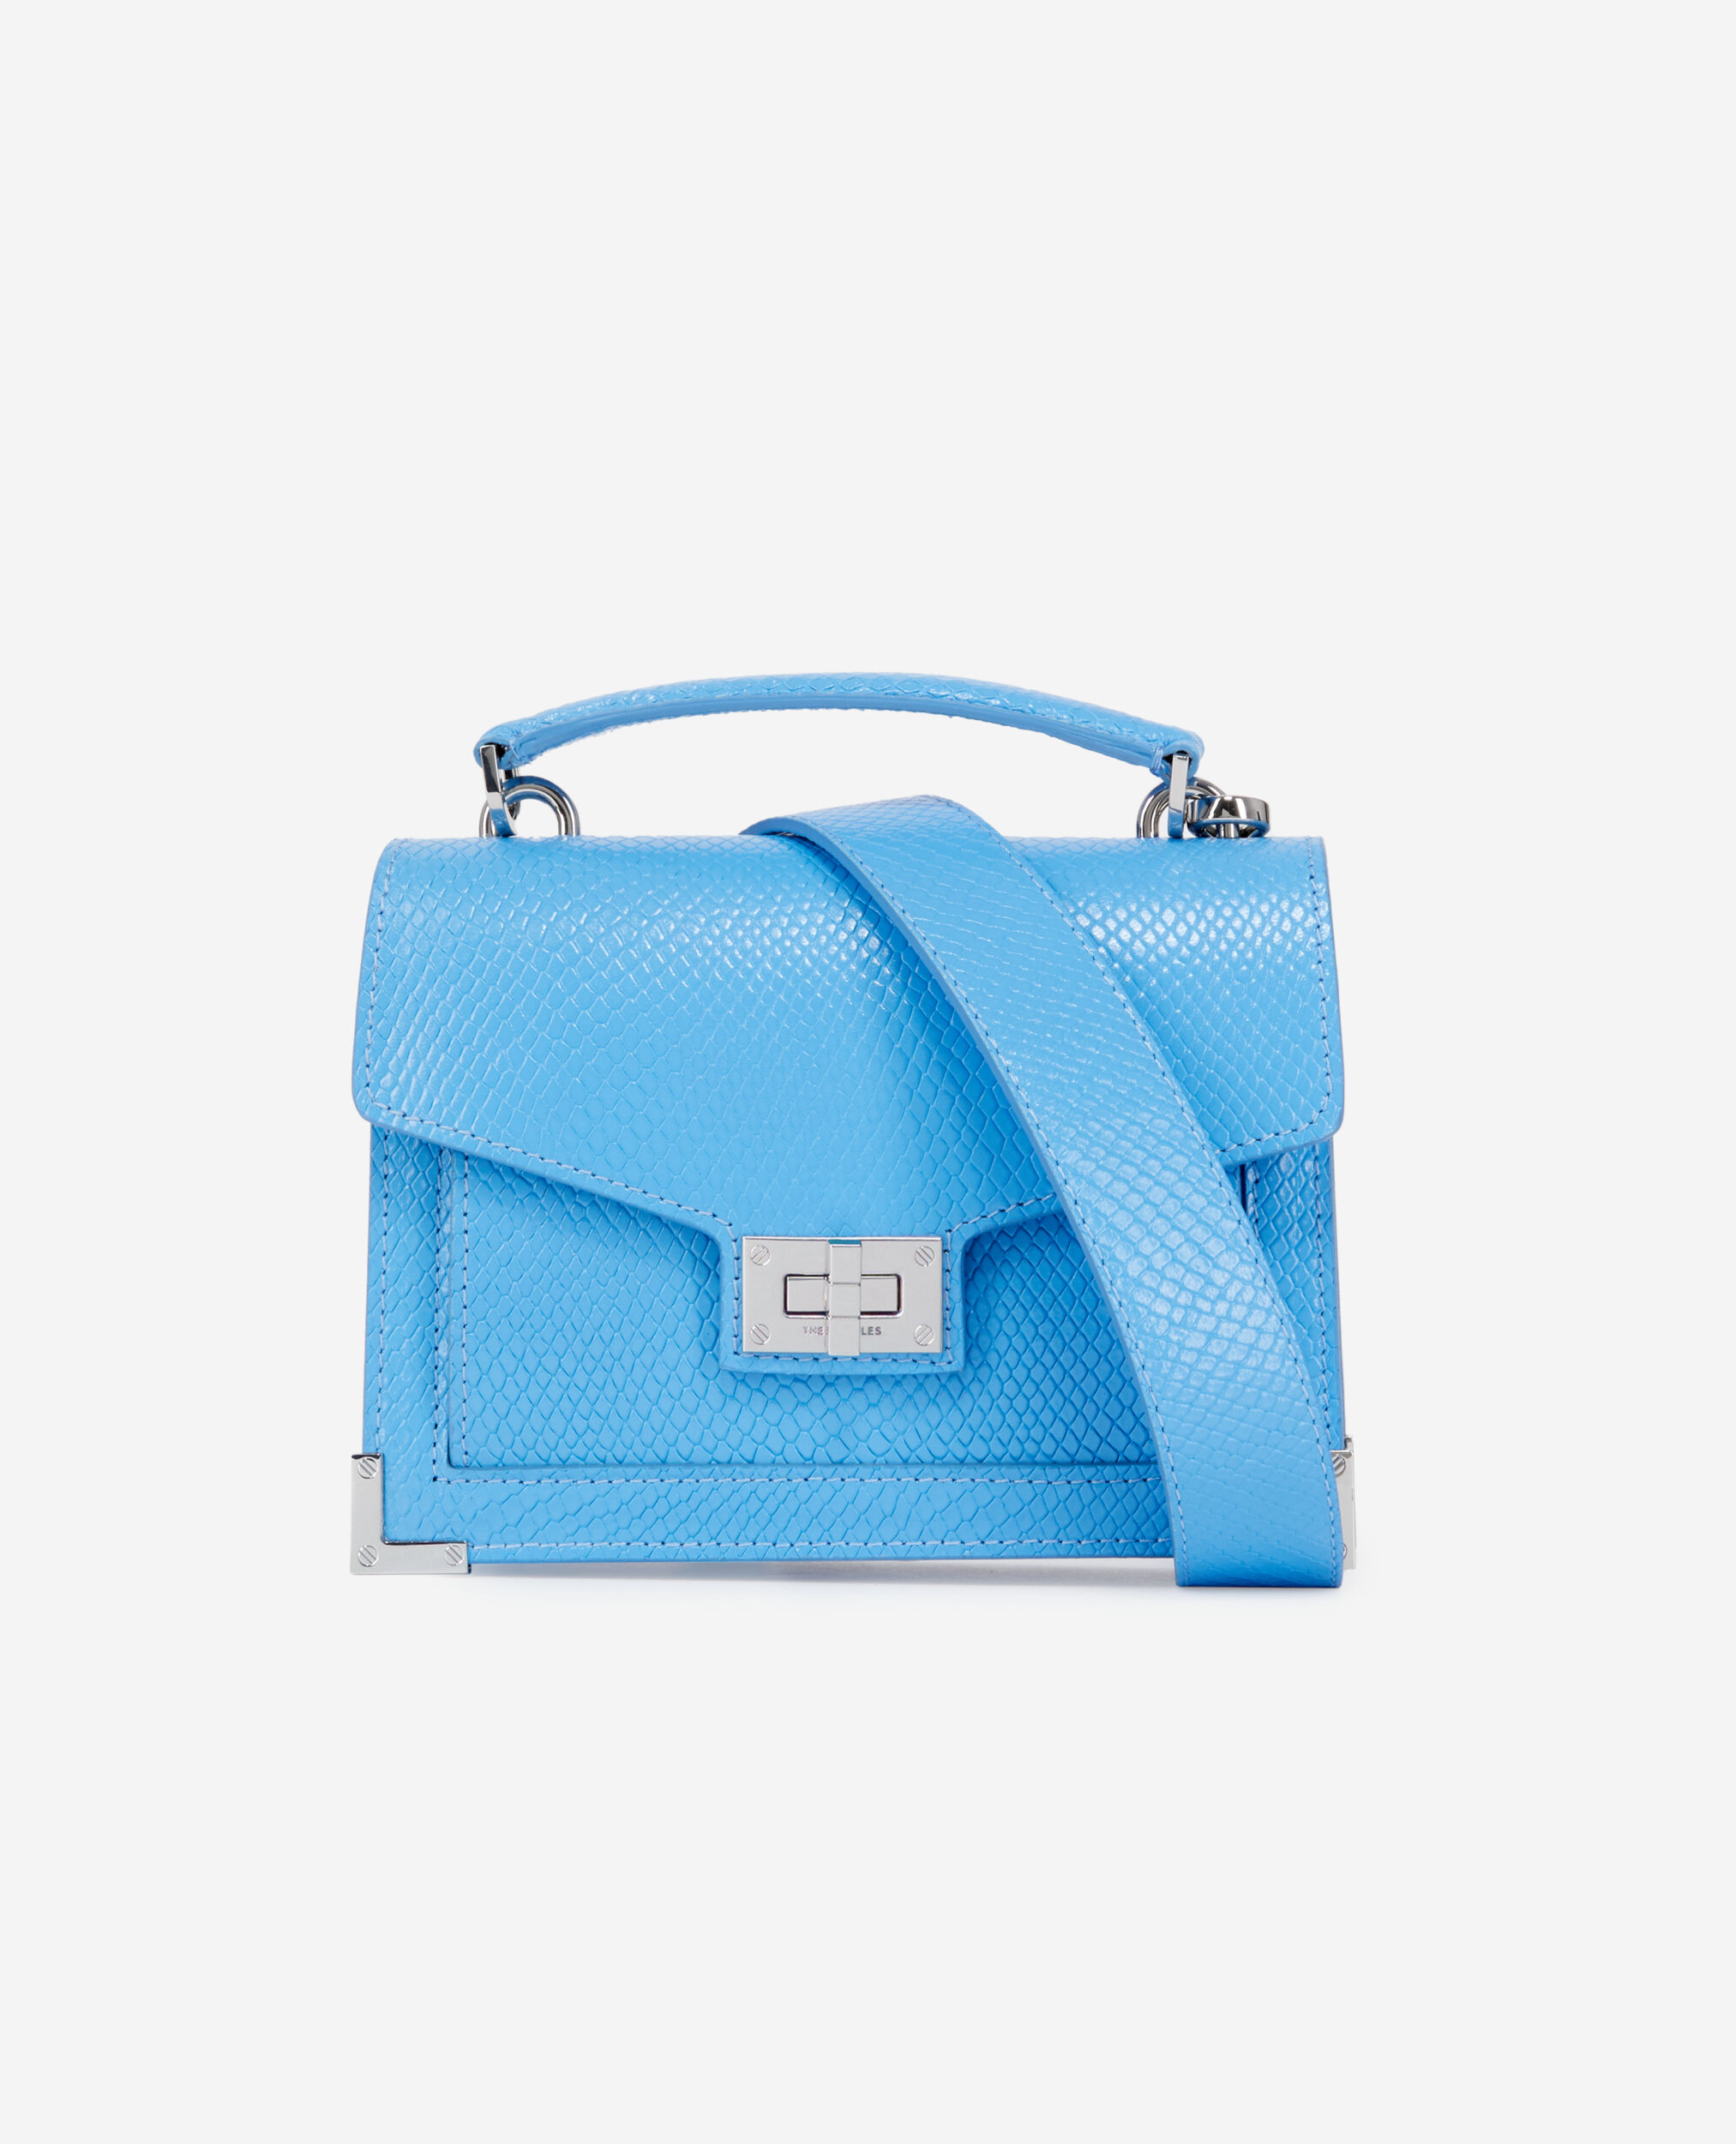 Small Emily bag in blue leather, BLUE, hi-res image number null